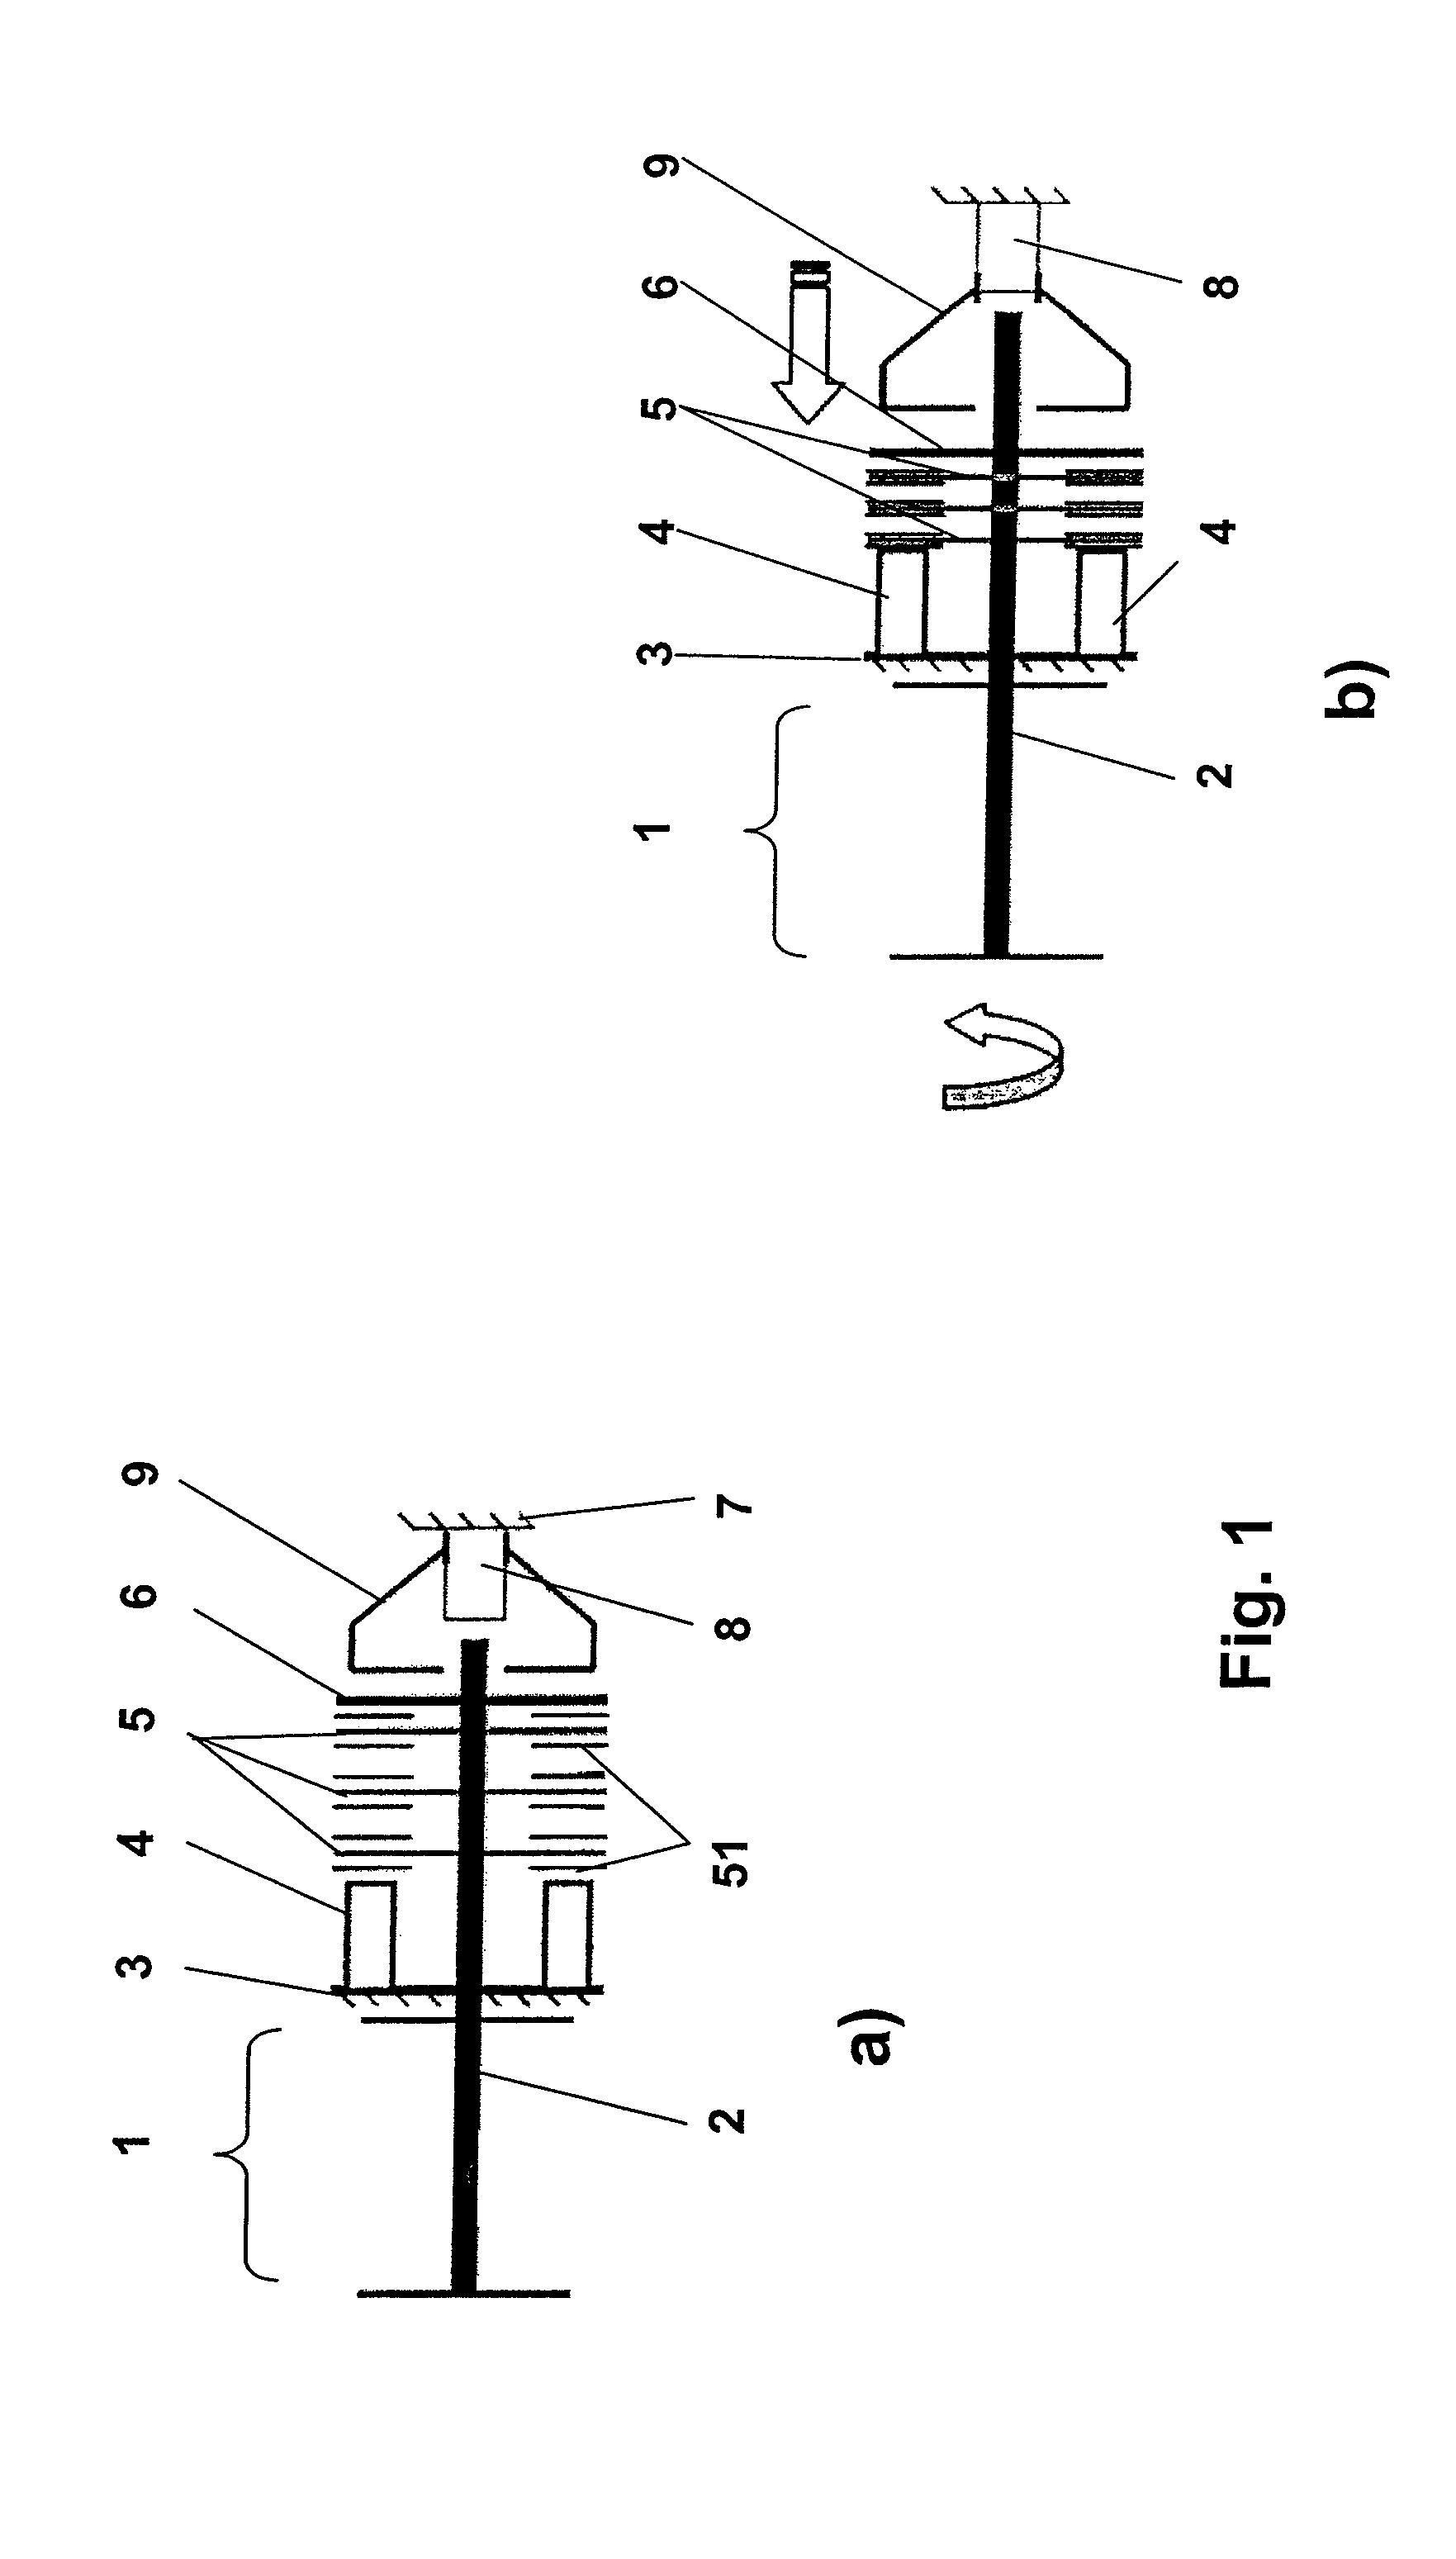 Device and method for tightening a safety belt serving to protect occupants in a vehicle